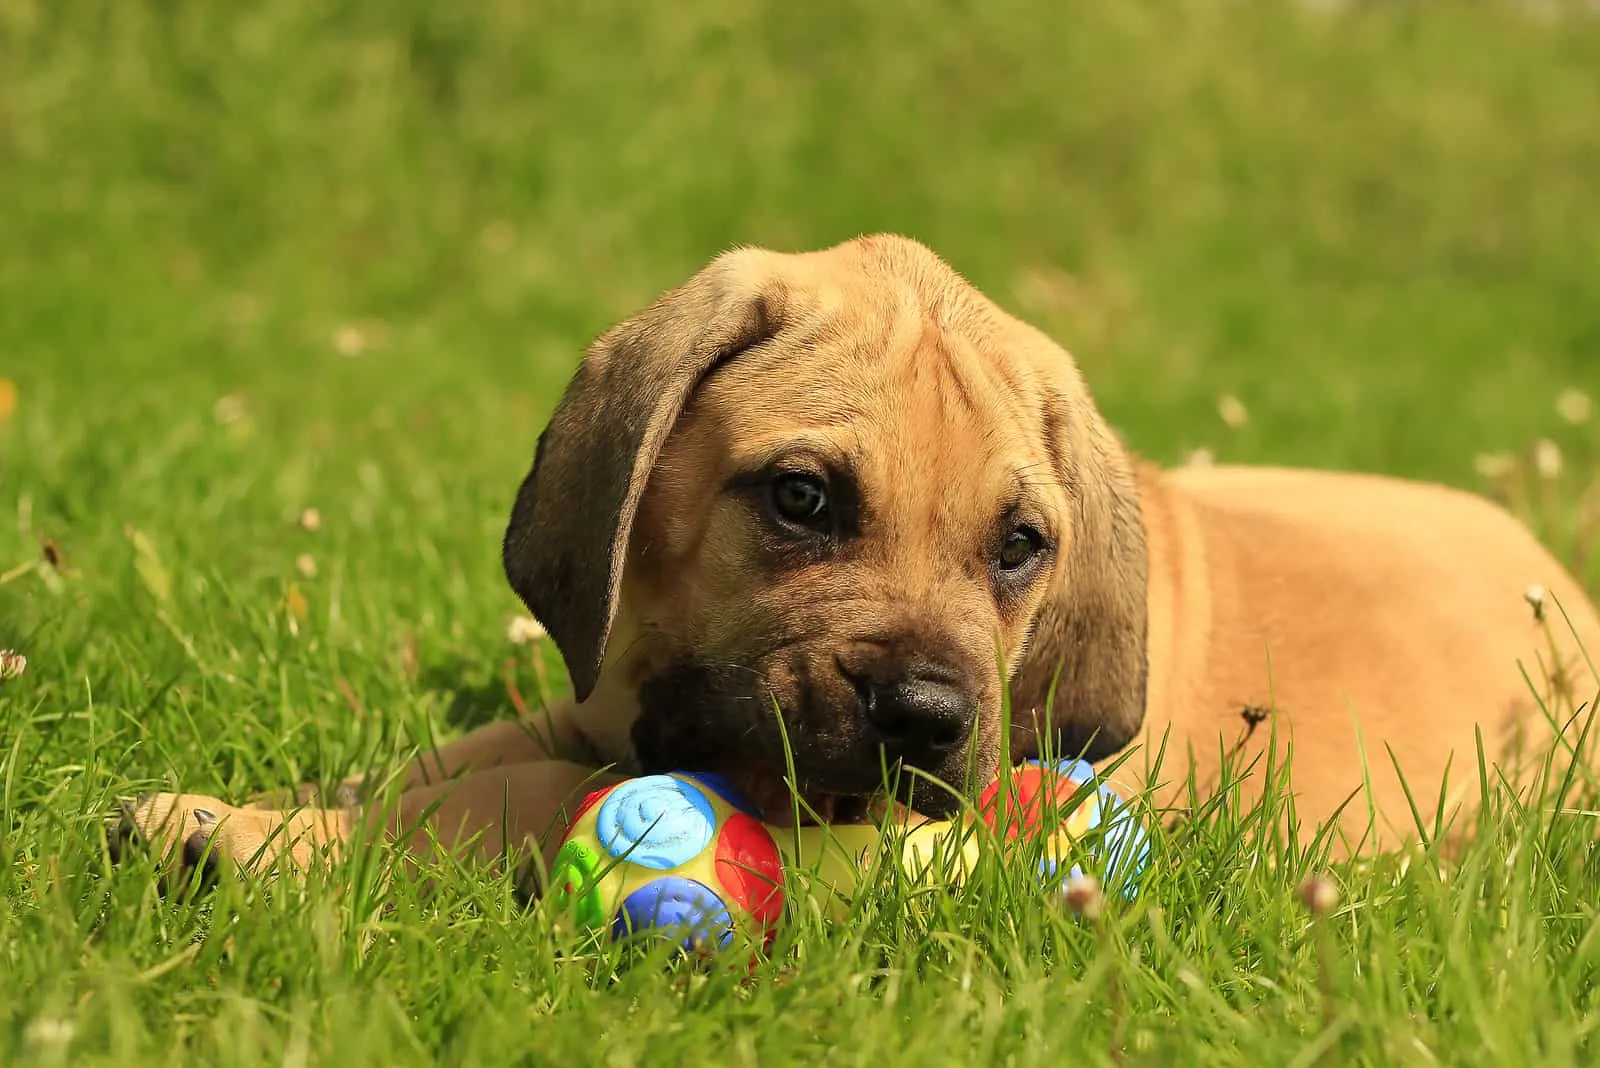 Boerboel puppy playingwith ball in the grass